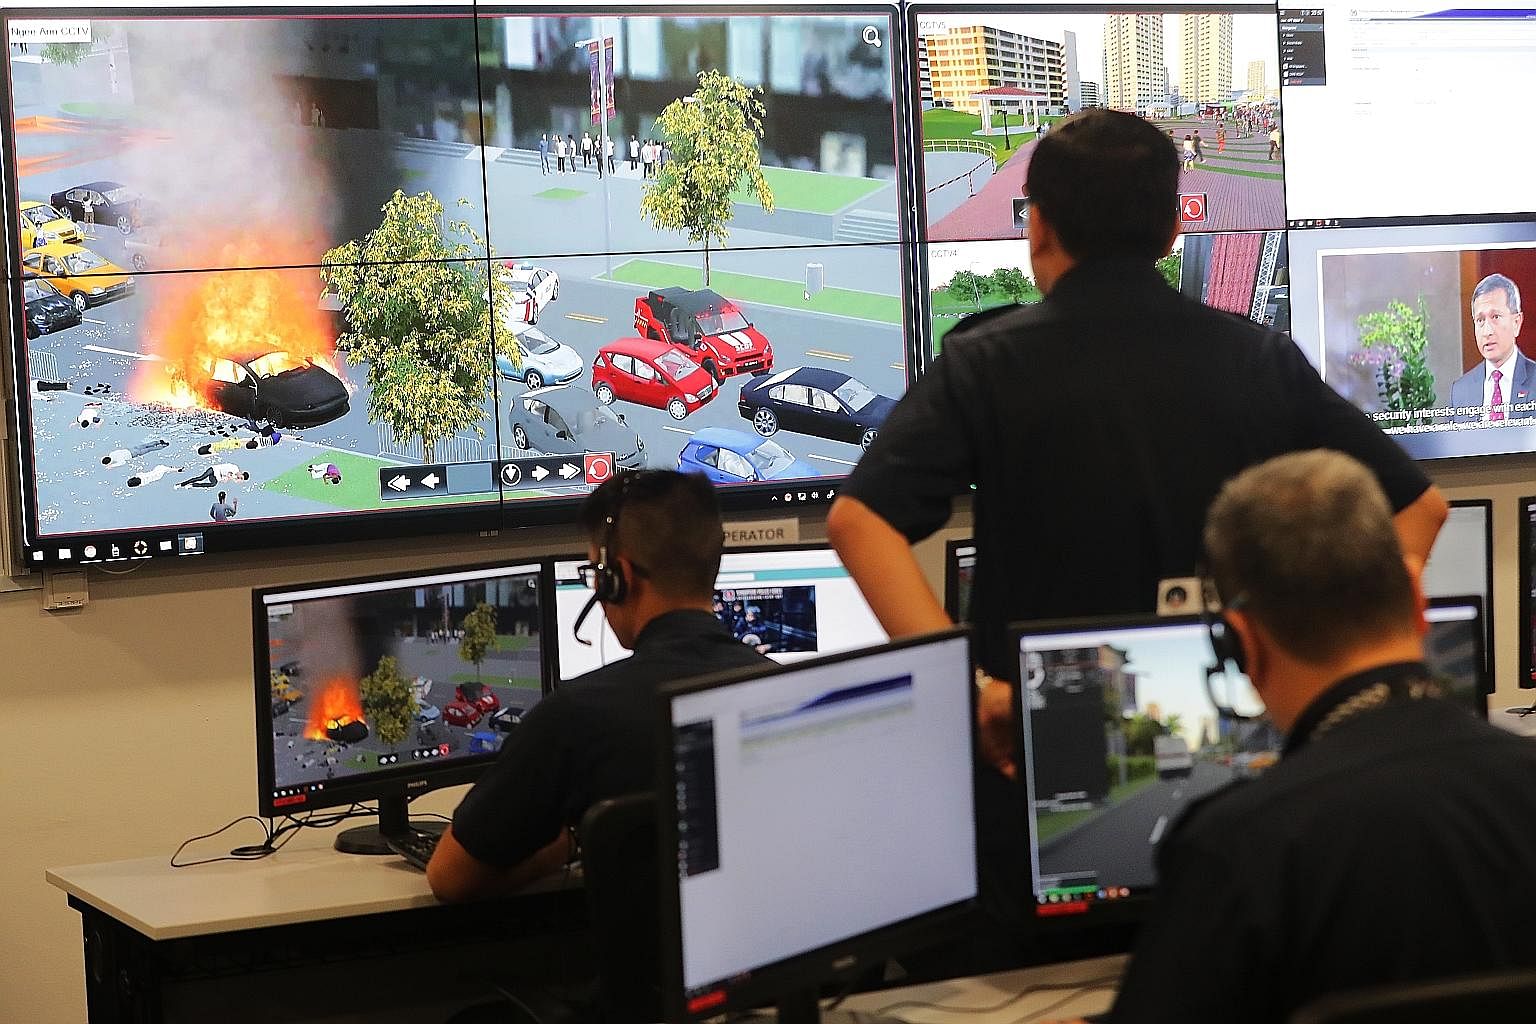 Simulation of a car explosion being monitored in the command post at the Home Team Simulation Centre. The simulation system allows up to 20 commanders from different departments to be trained in joint operations. A simulation exercise can take up to 